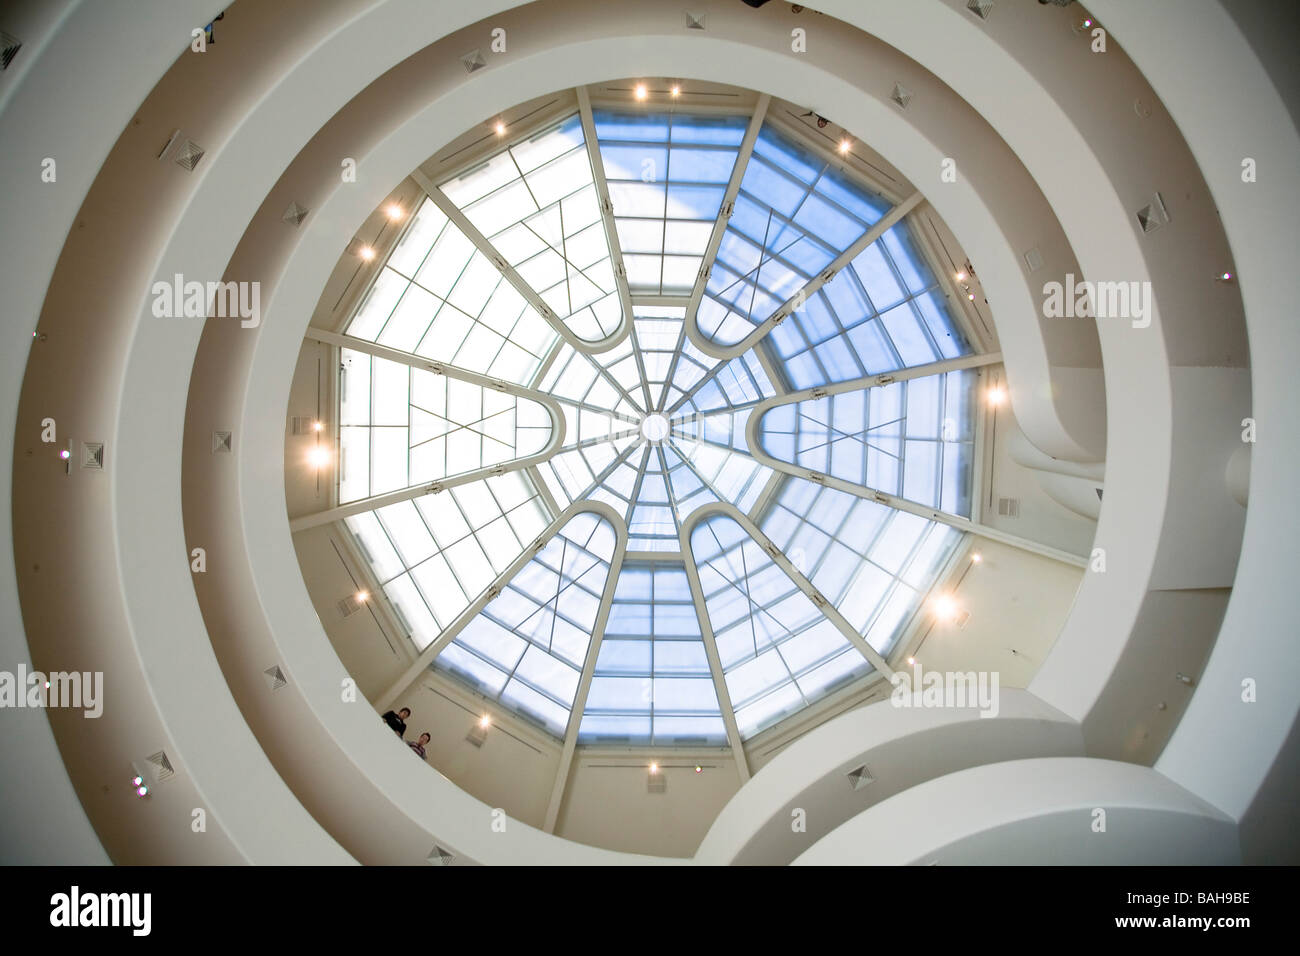 GUGGENHEIM MUSEUM NEW YORK, Frank Lloyd Wright, NEW YORK, UNITED STATES Banque D'Images